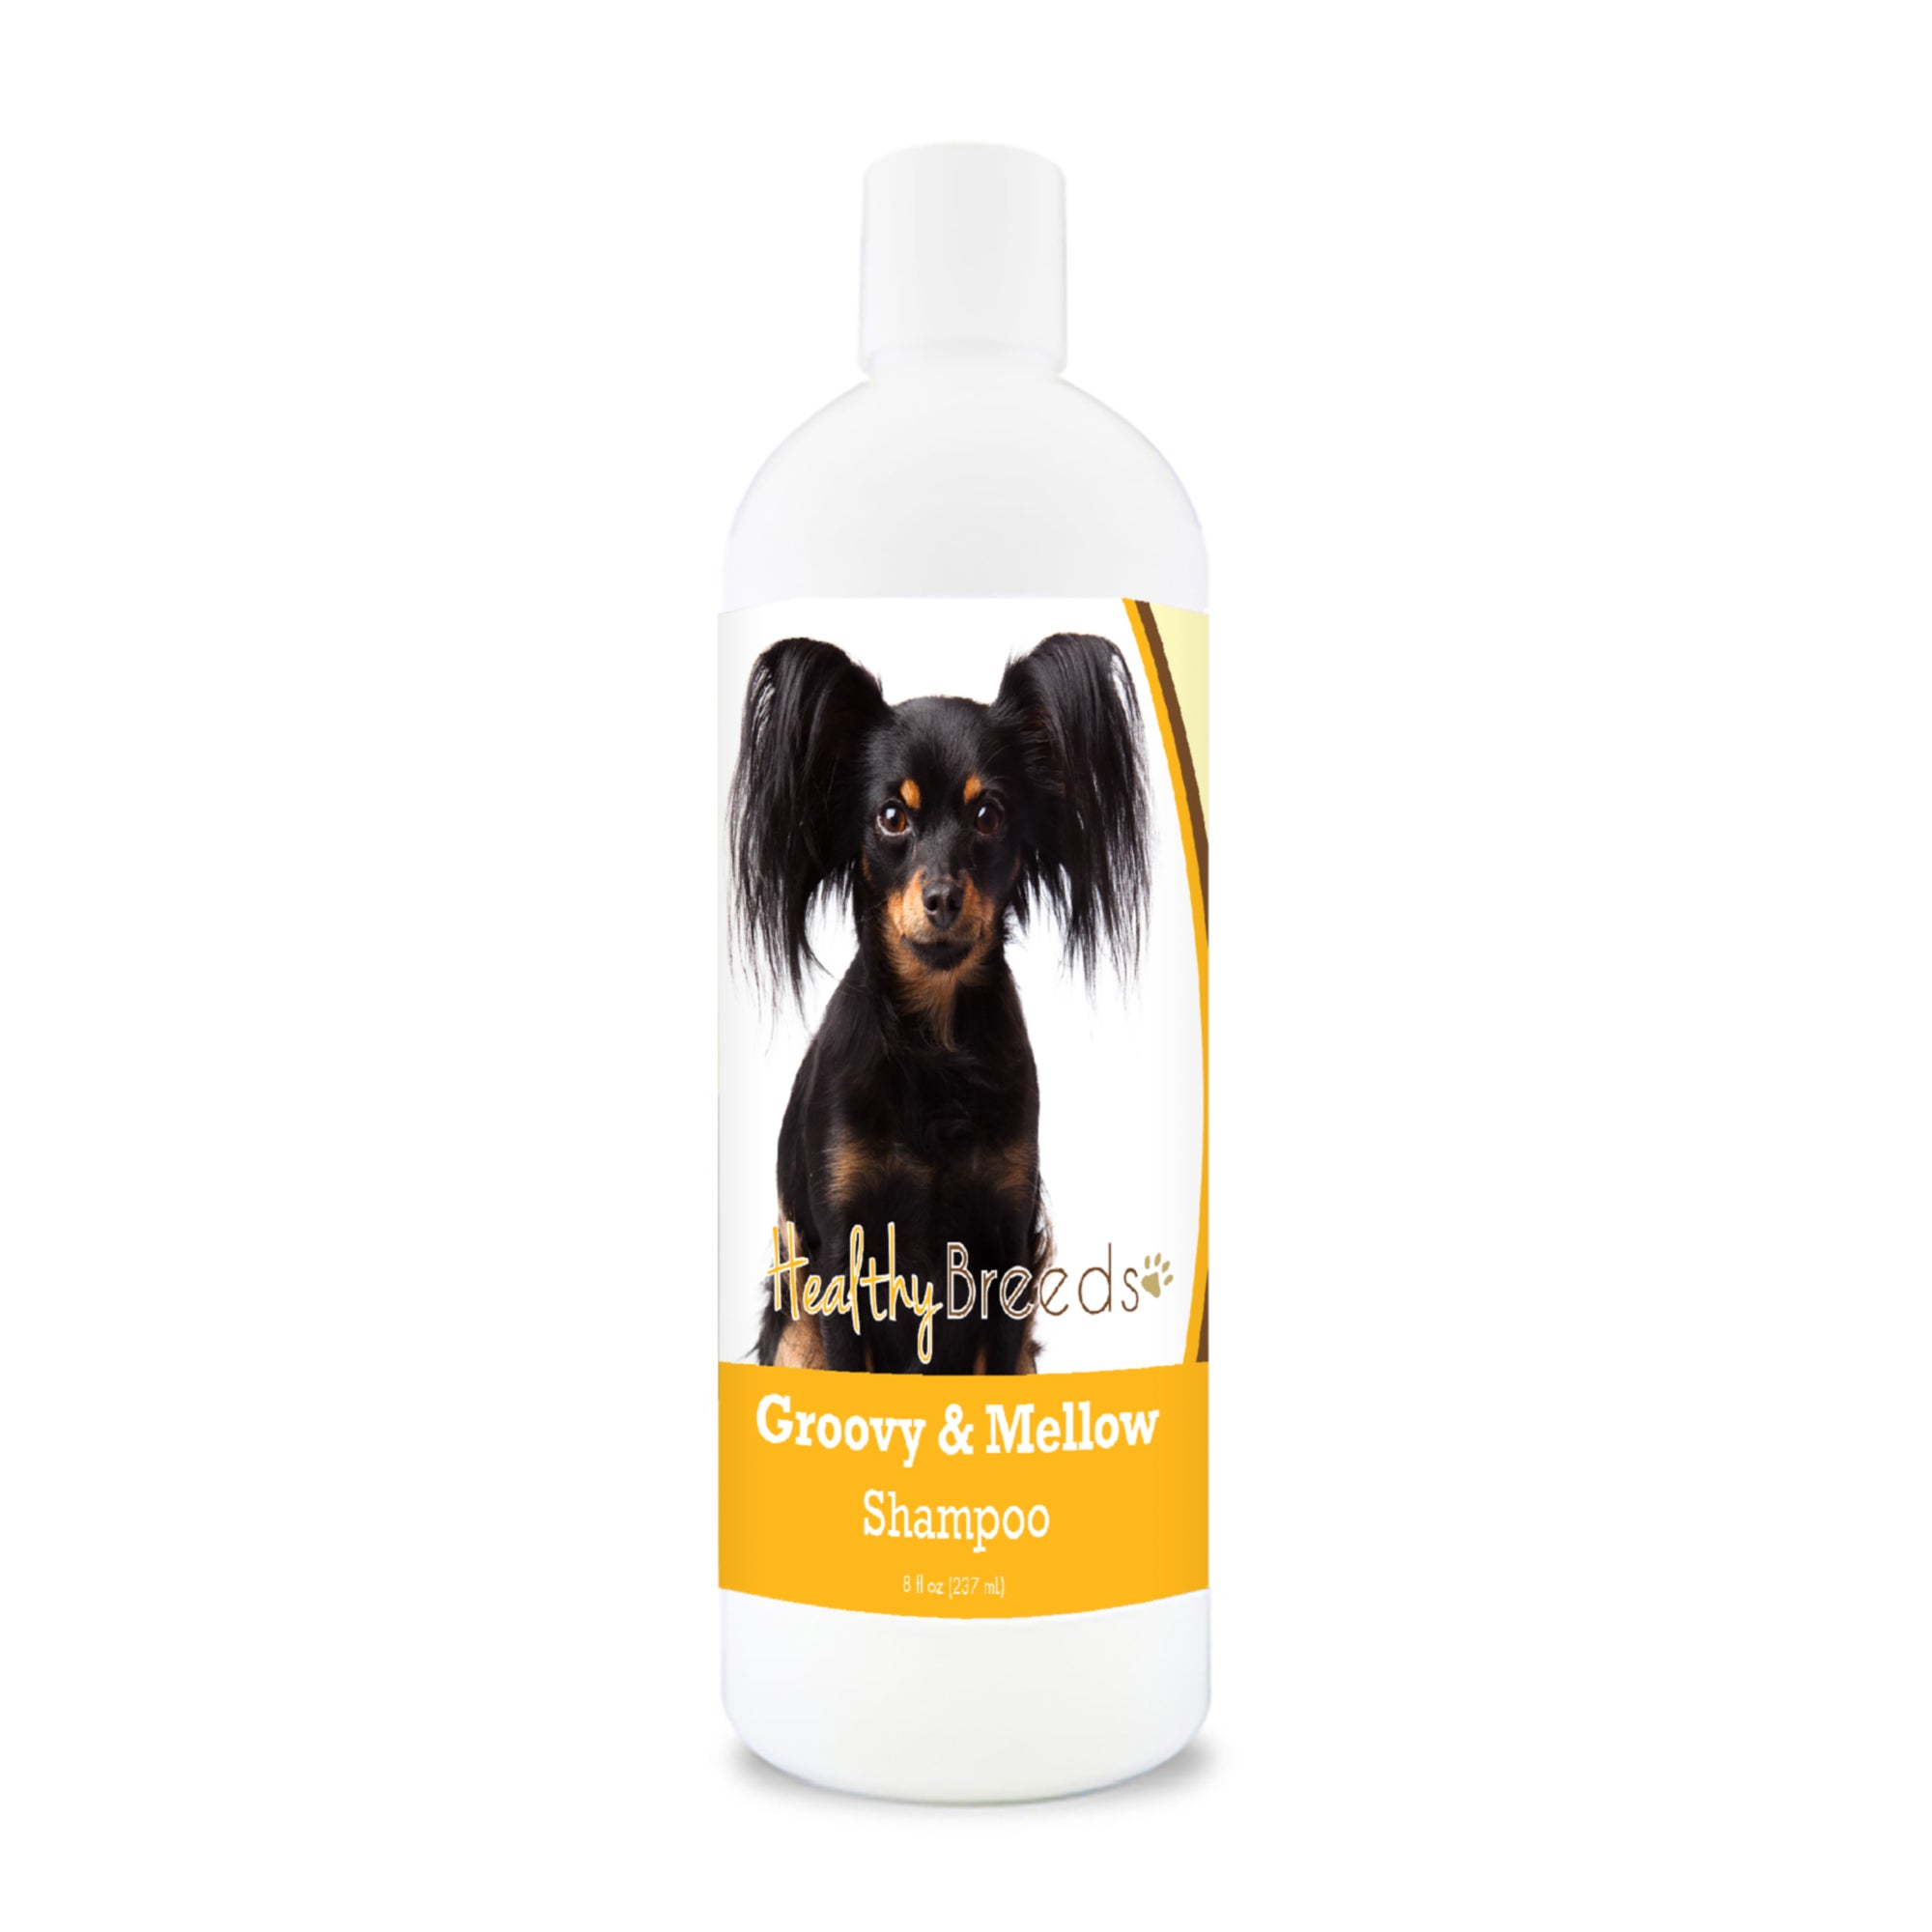 Russian Toy Terrier Groovy & Mellow Shampoo 8 oz